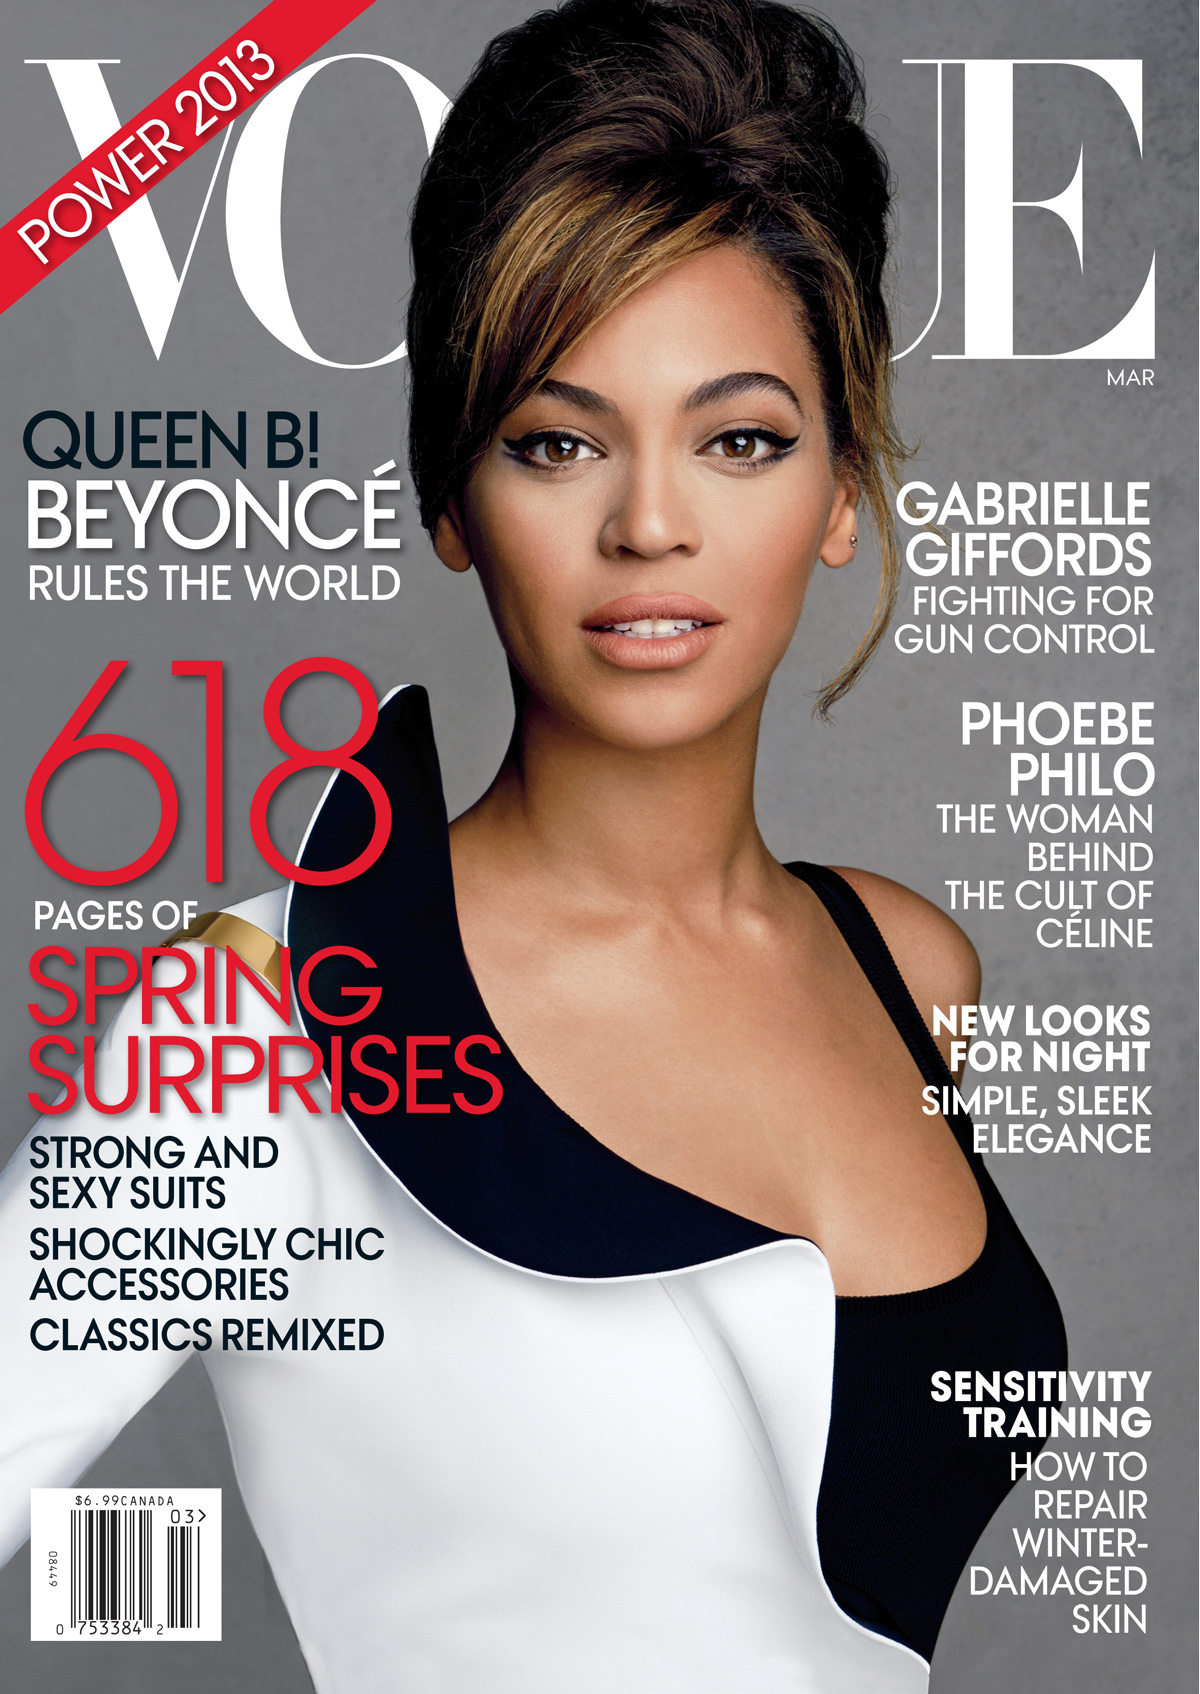 beyonce-vogue-cover.jpg